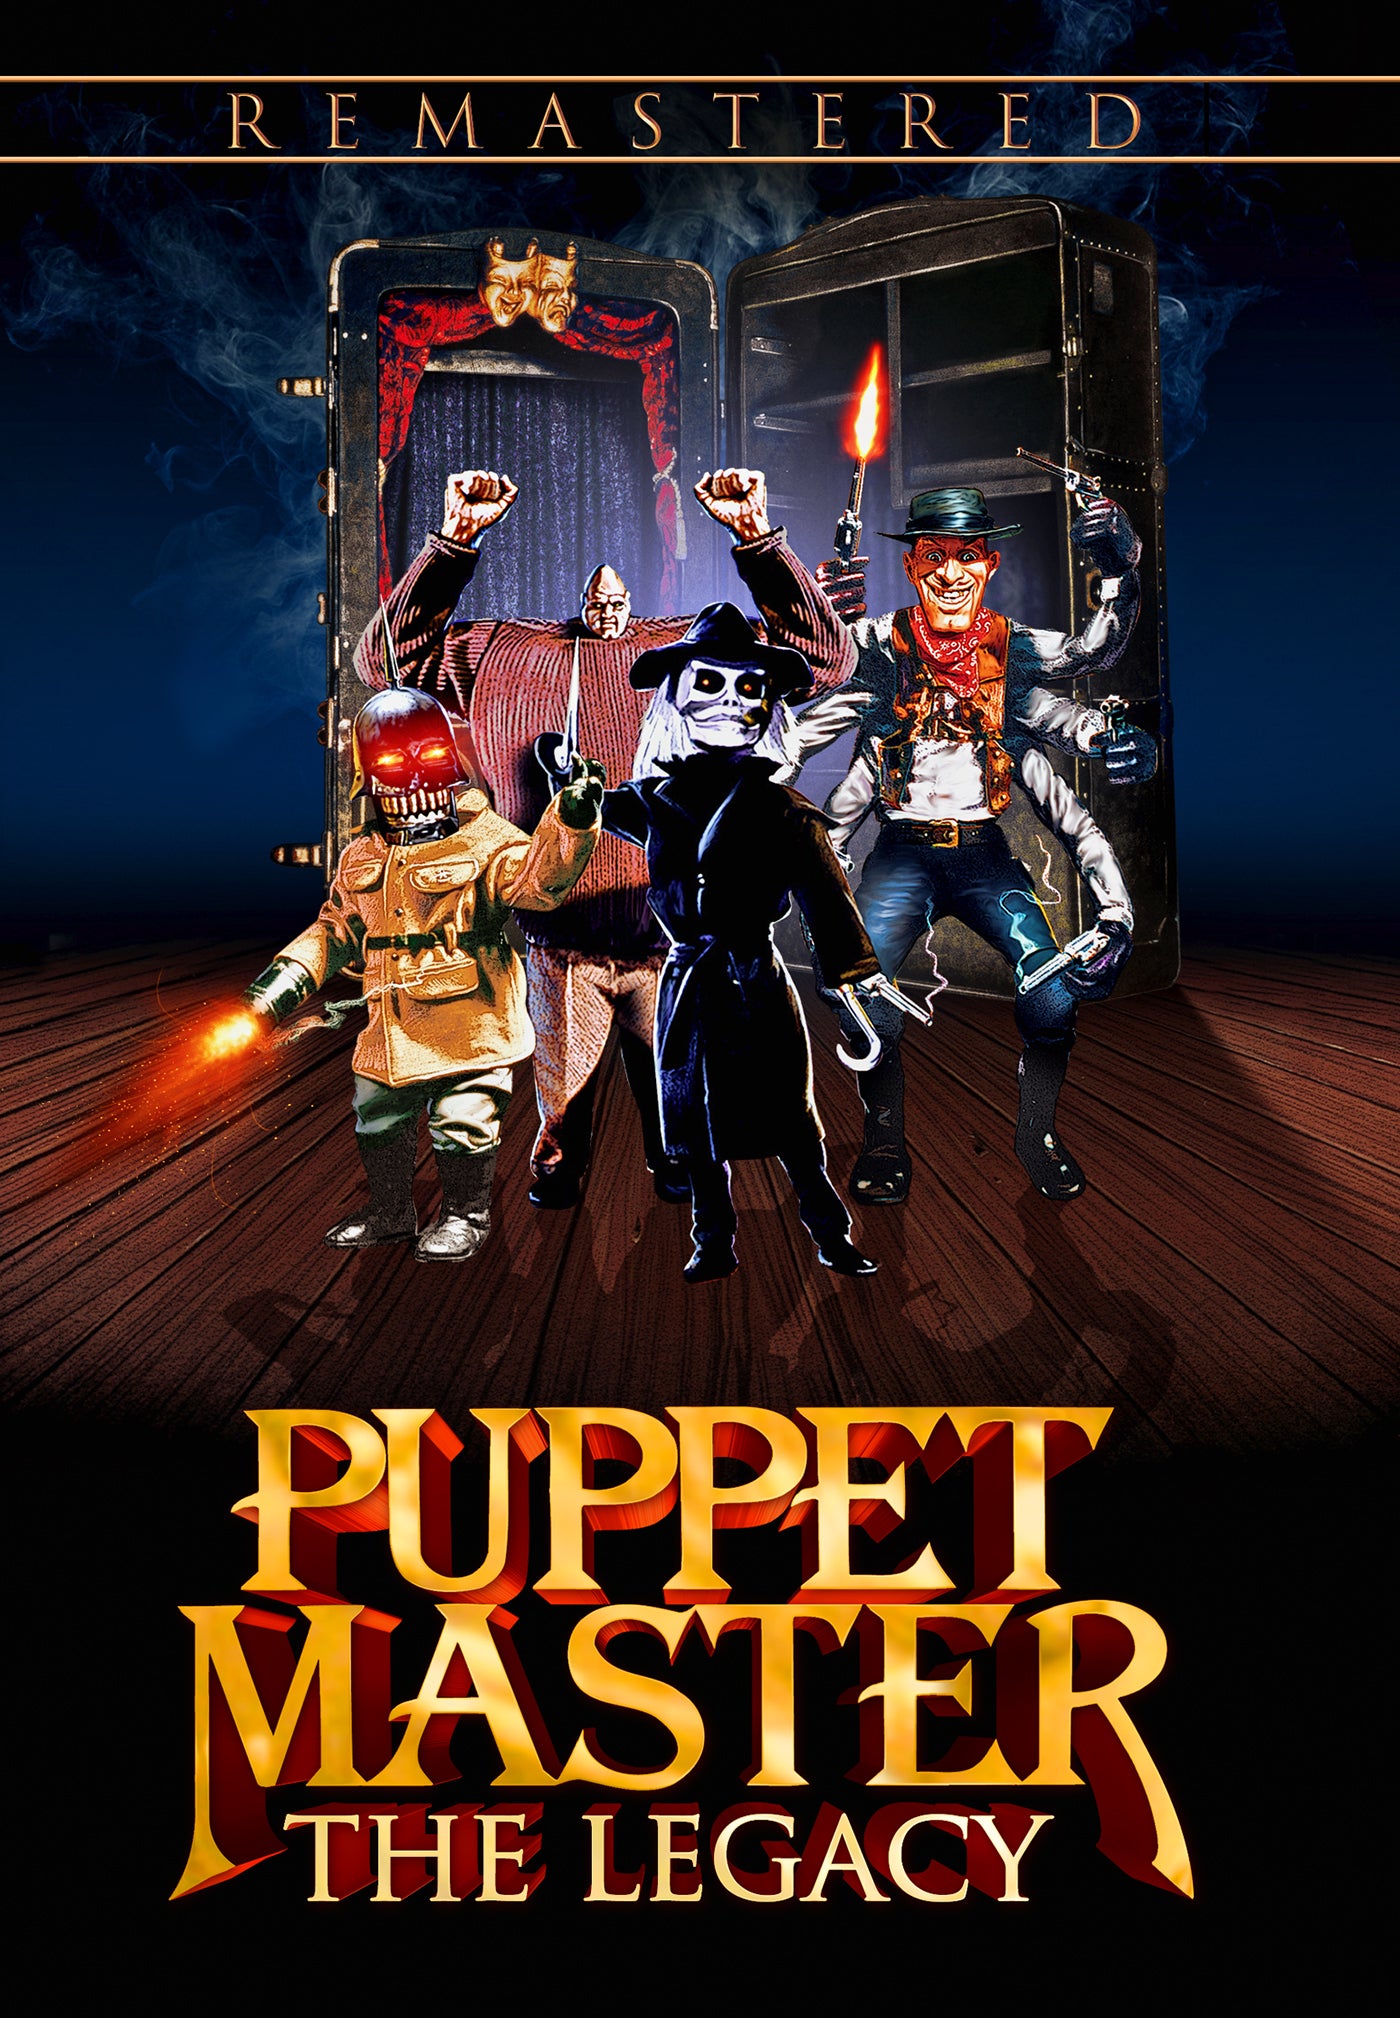 PUPPET MASTER: THE LEGACY (REMASTERED) DVD